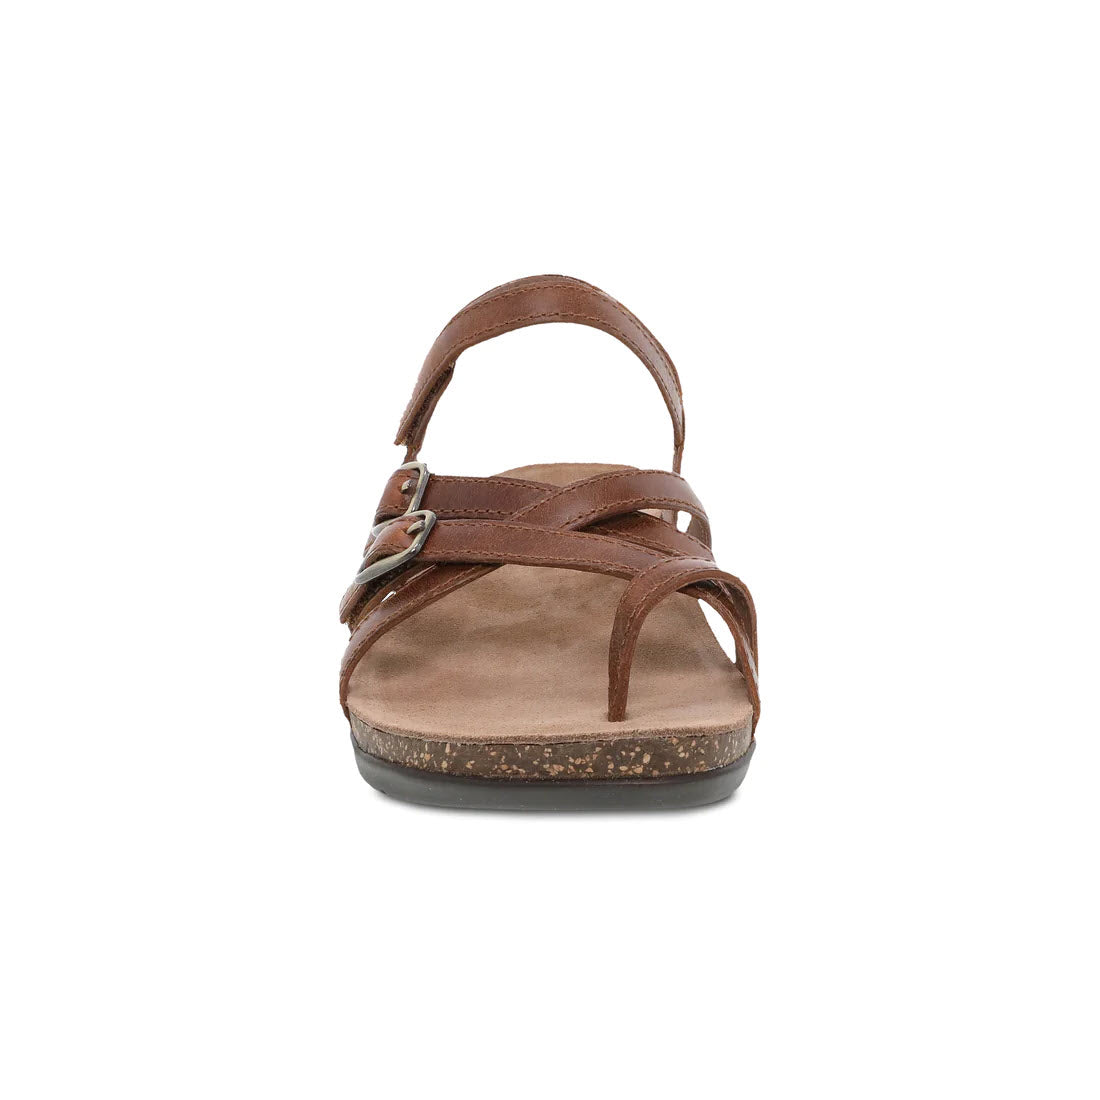 Brown leather strappy sandal with fashionable straps on a white background. - Dansko Roslyn Tan Women&#39;s